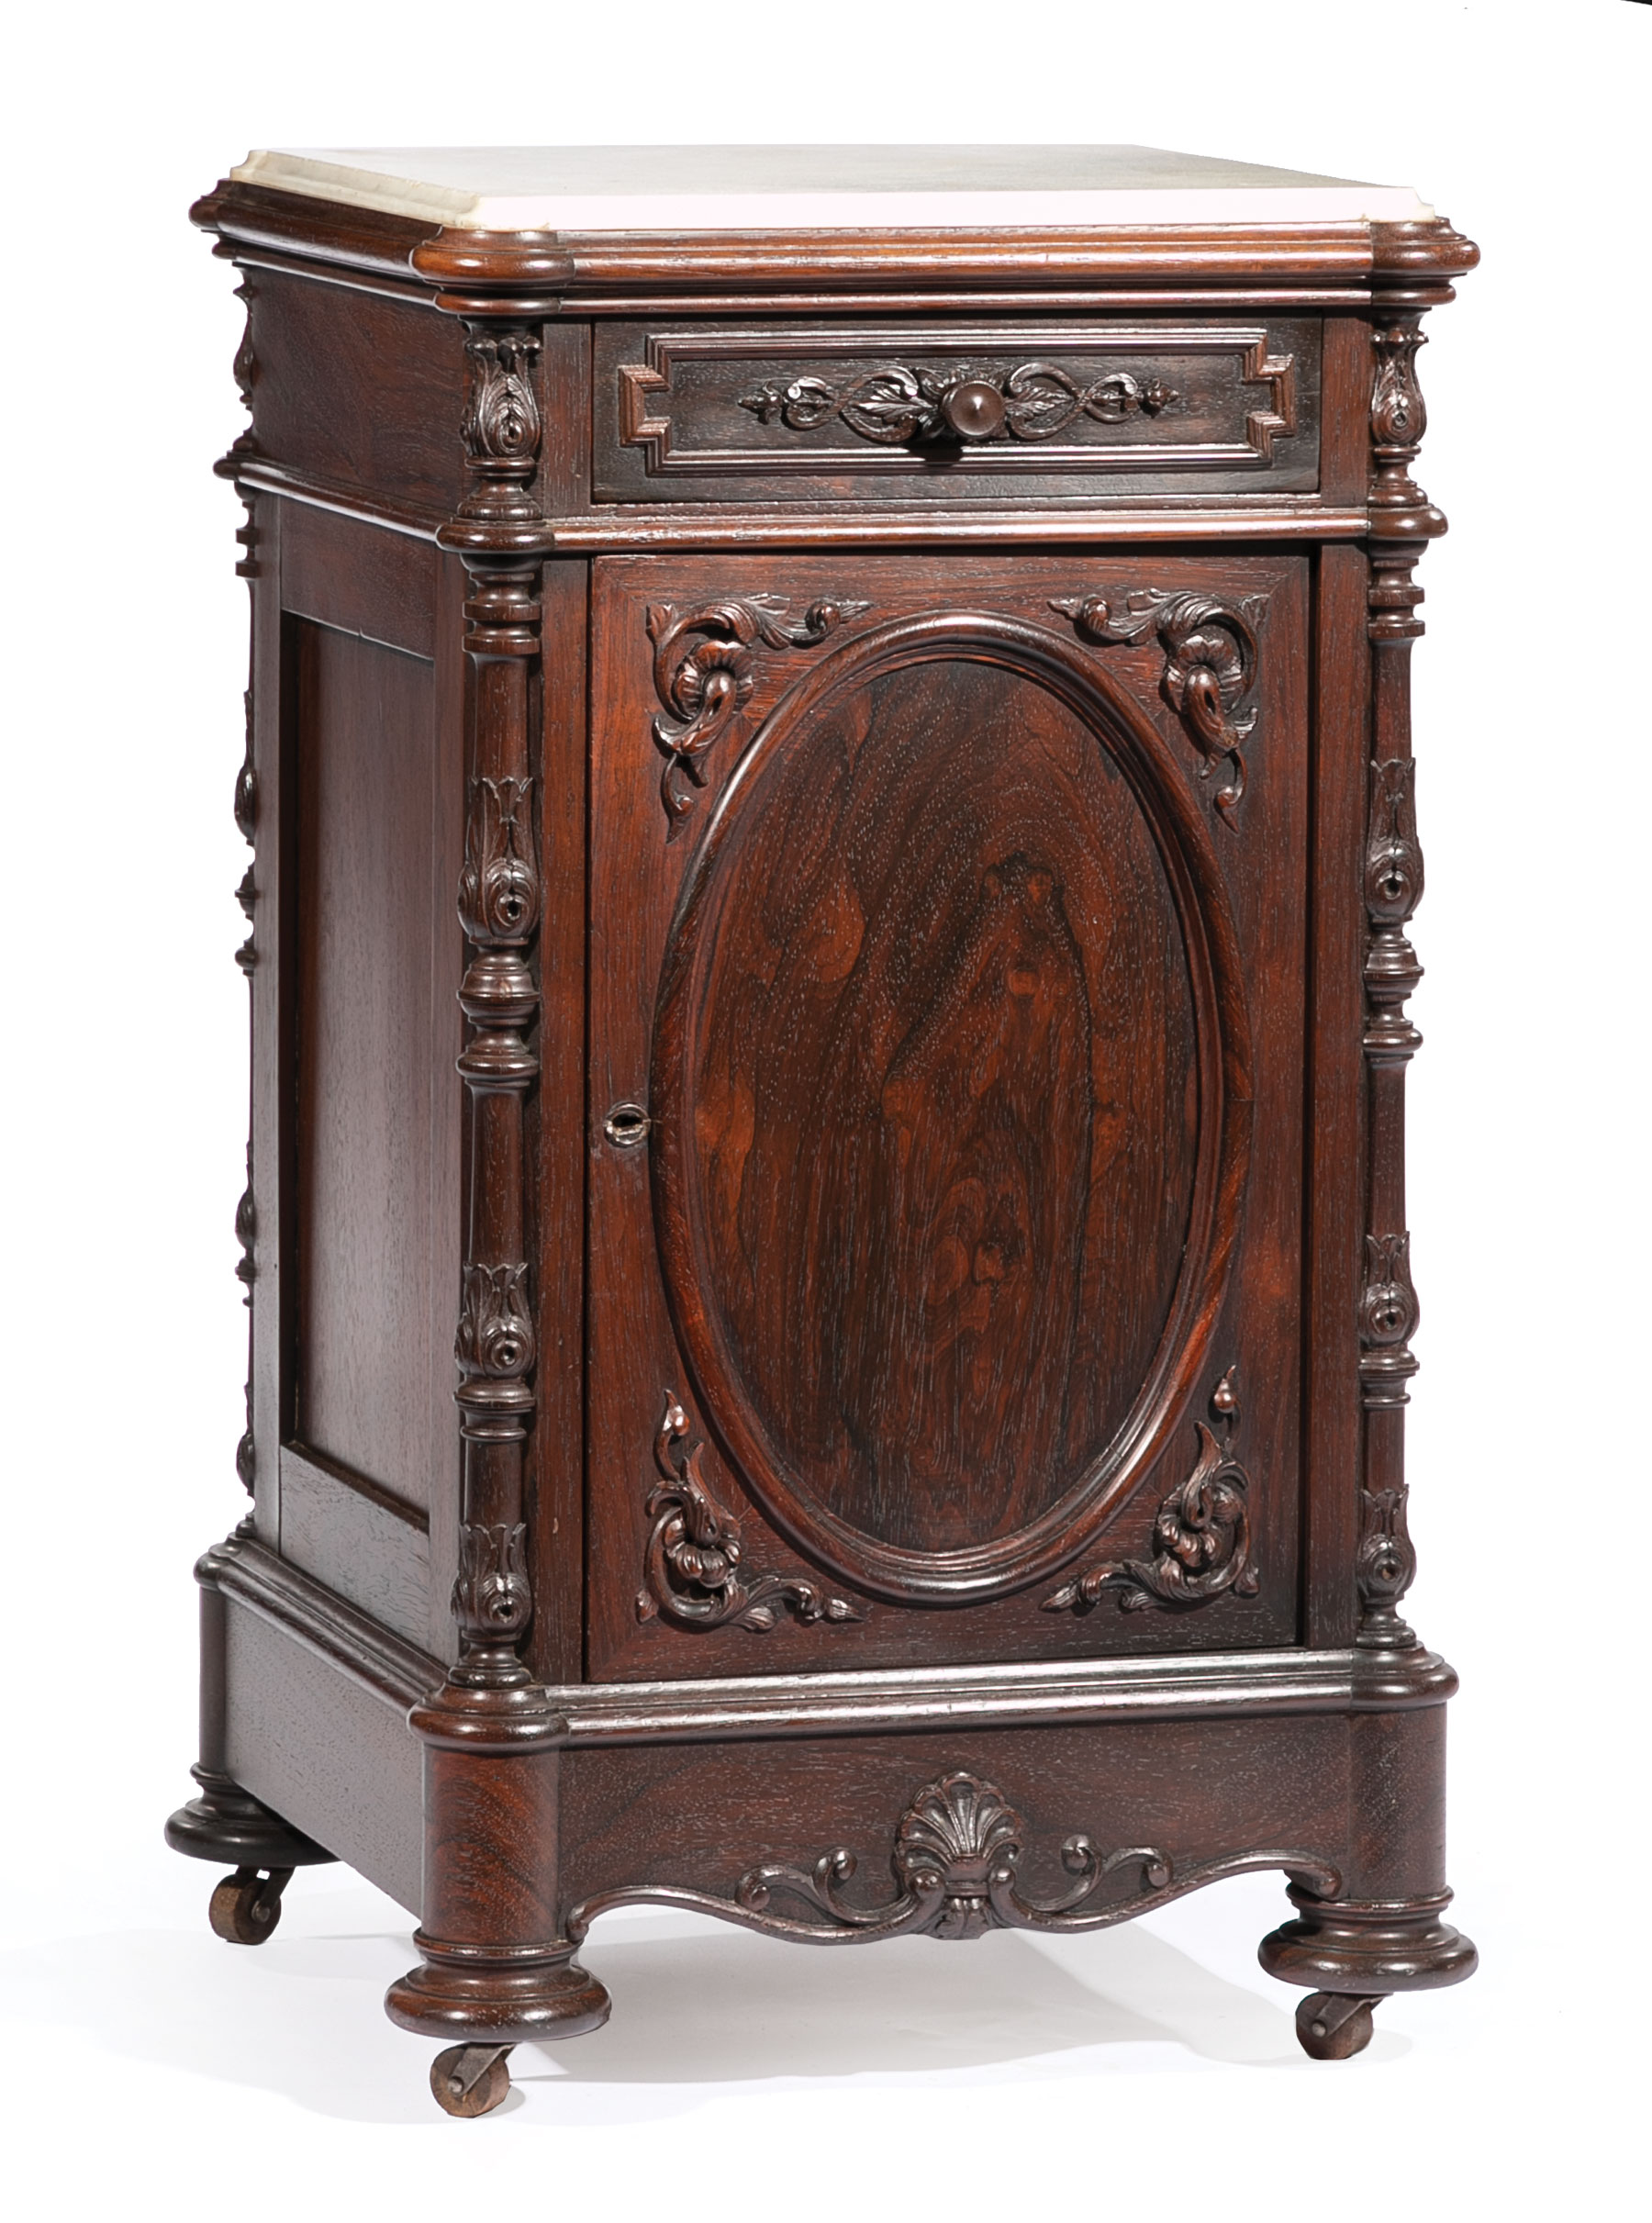 Very Fine American Carved Rosewood Bedroom Suite , mid-19th c., labeled A. (Alexander) Roux, incl. - Image 14 of 20